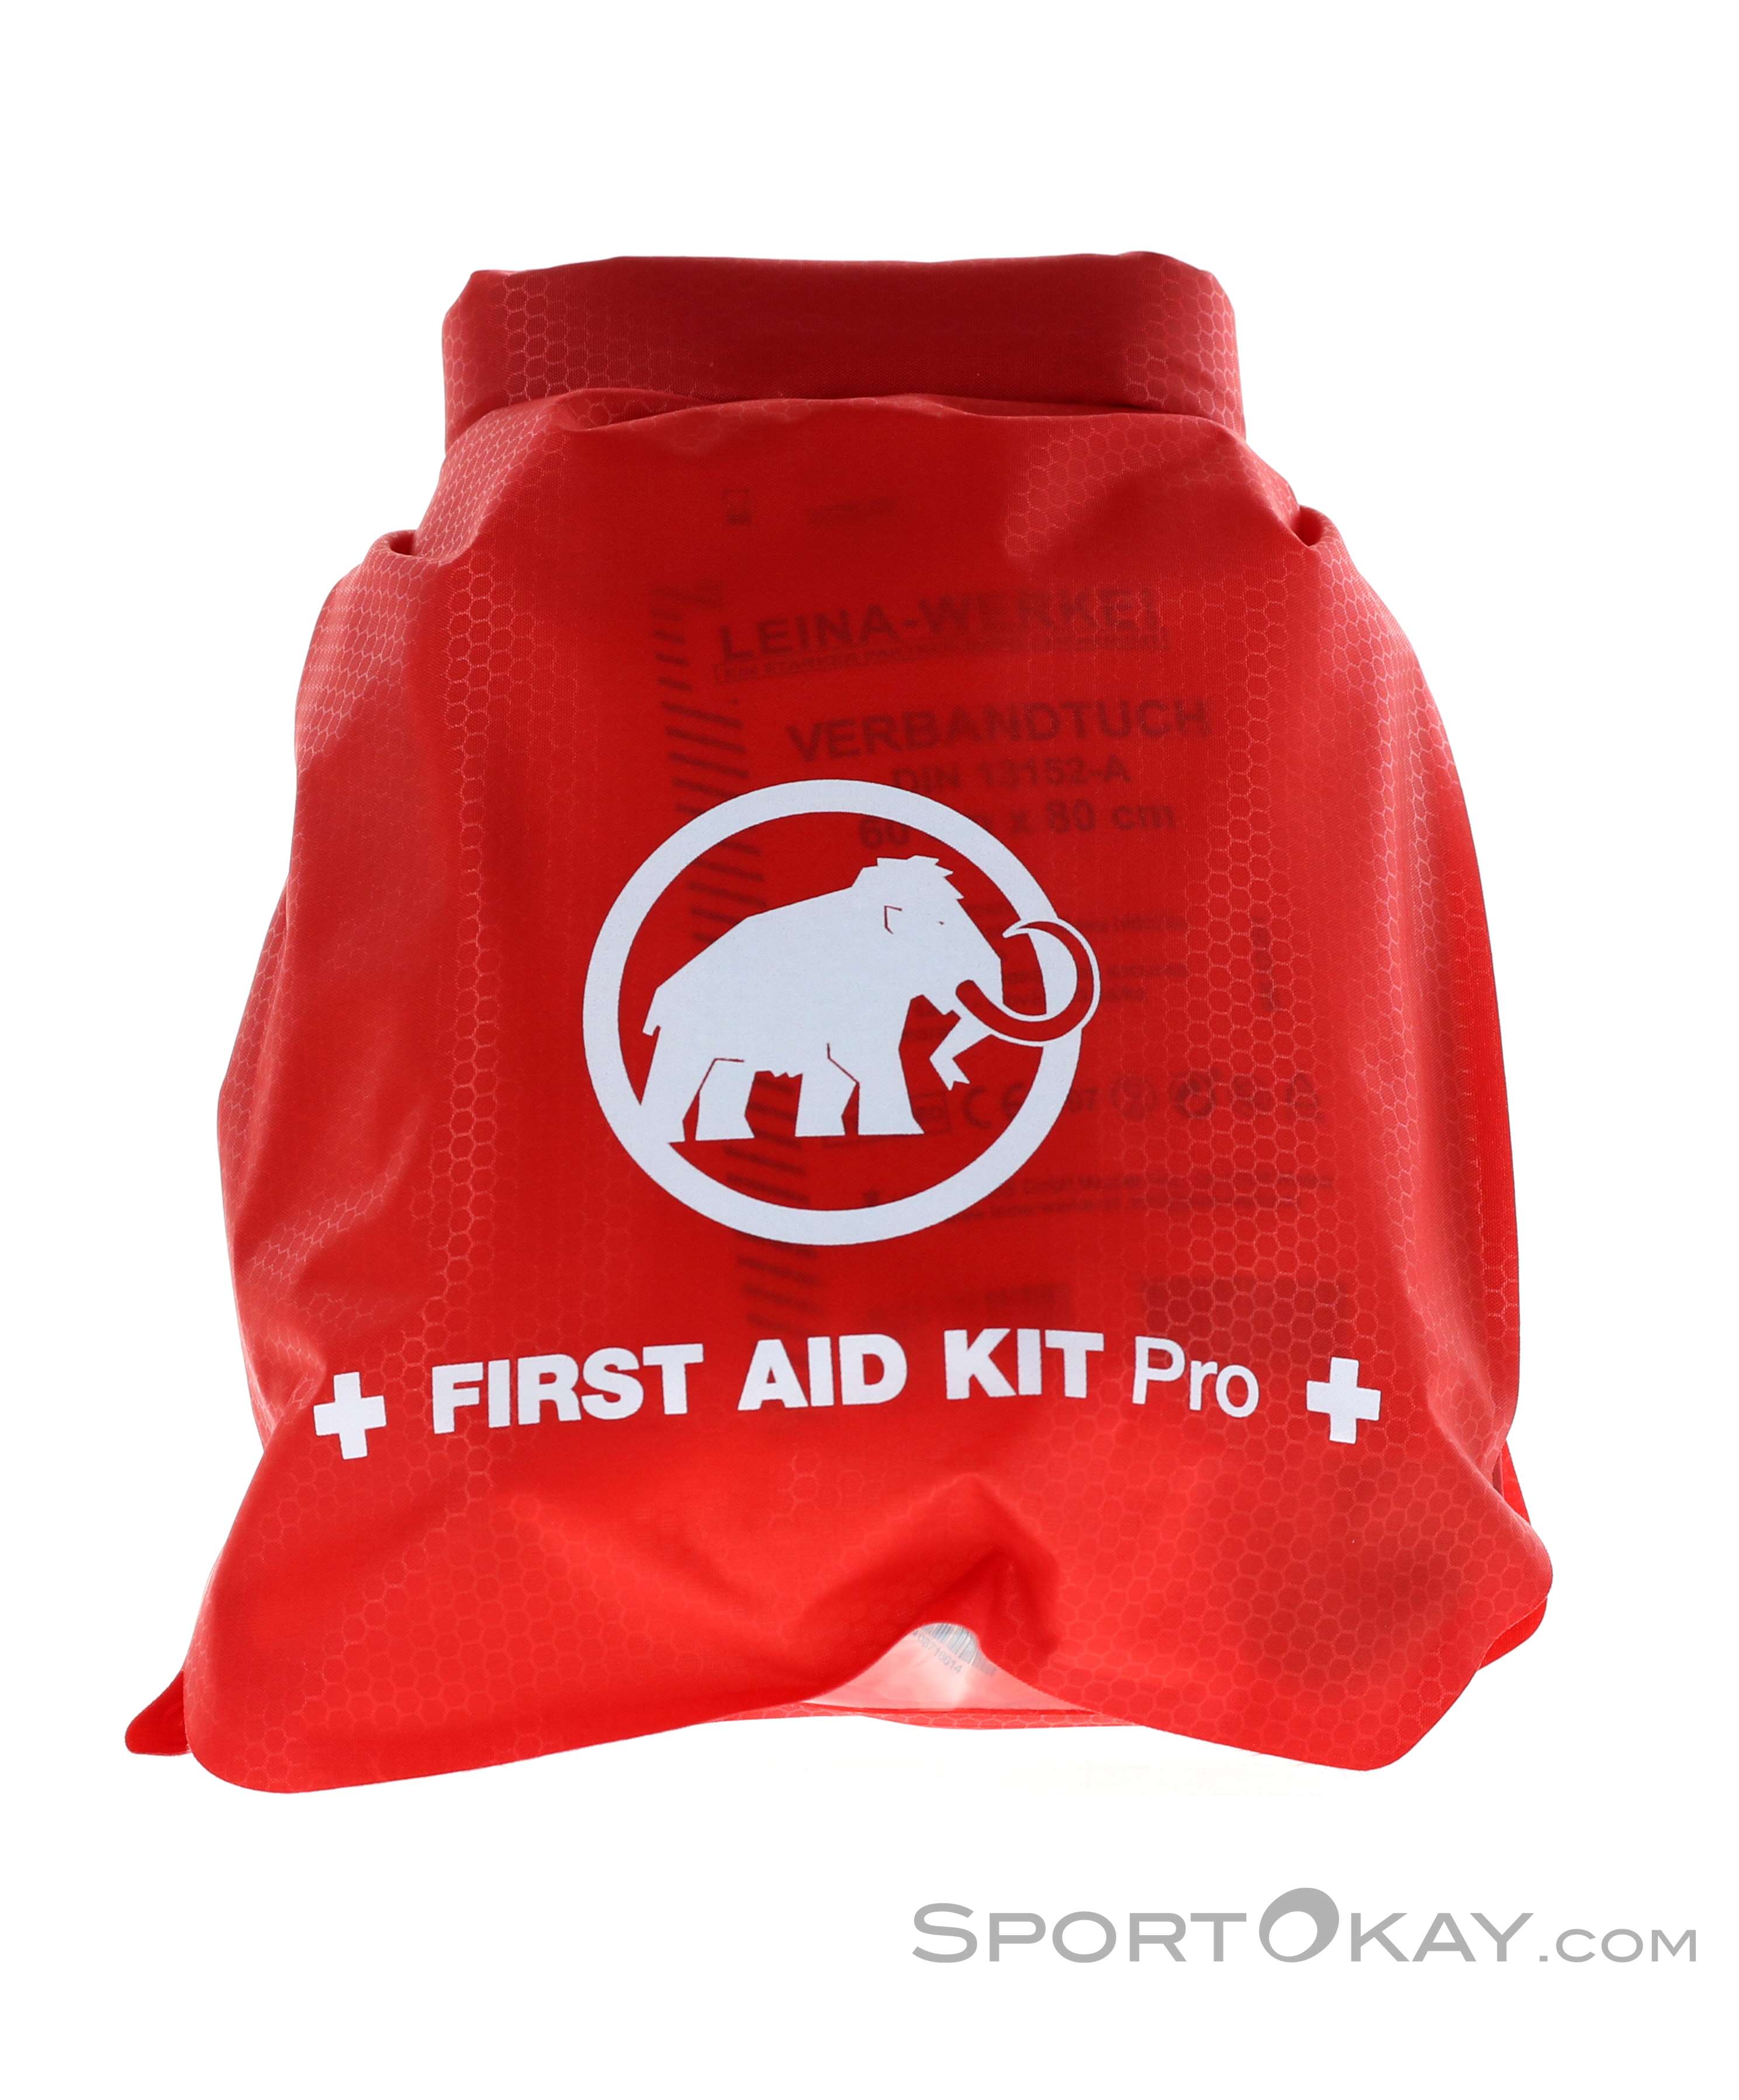 Mammut Kit Pro First Aid Kit First Aid Kits Camping Outdoor All